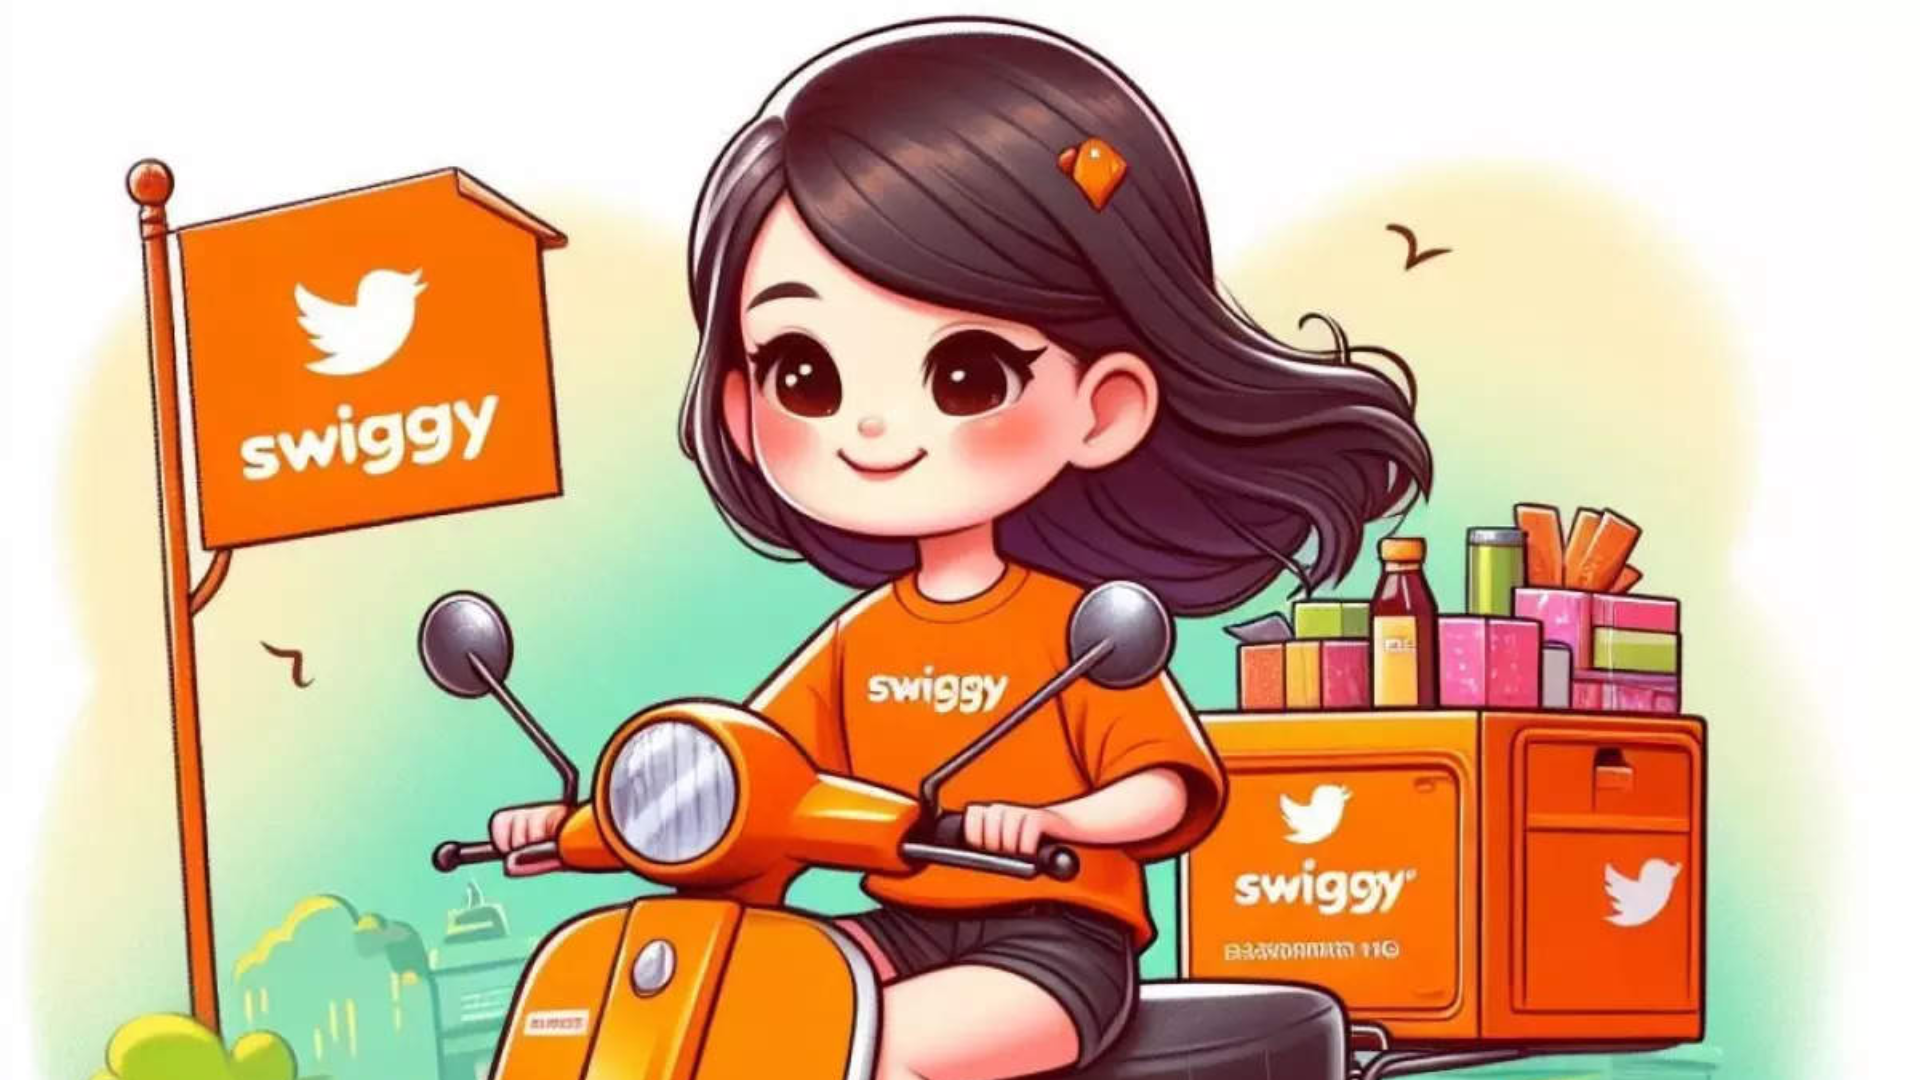 Spooky Animation on Swiggy App Sparks Viral Reactions and Hilarious Theories